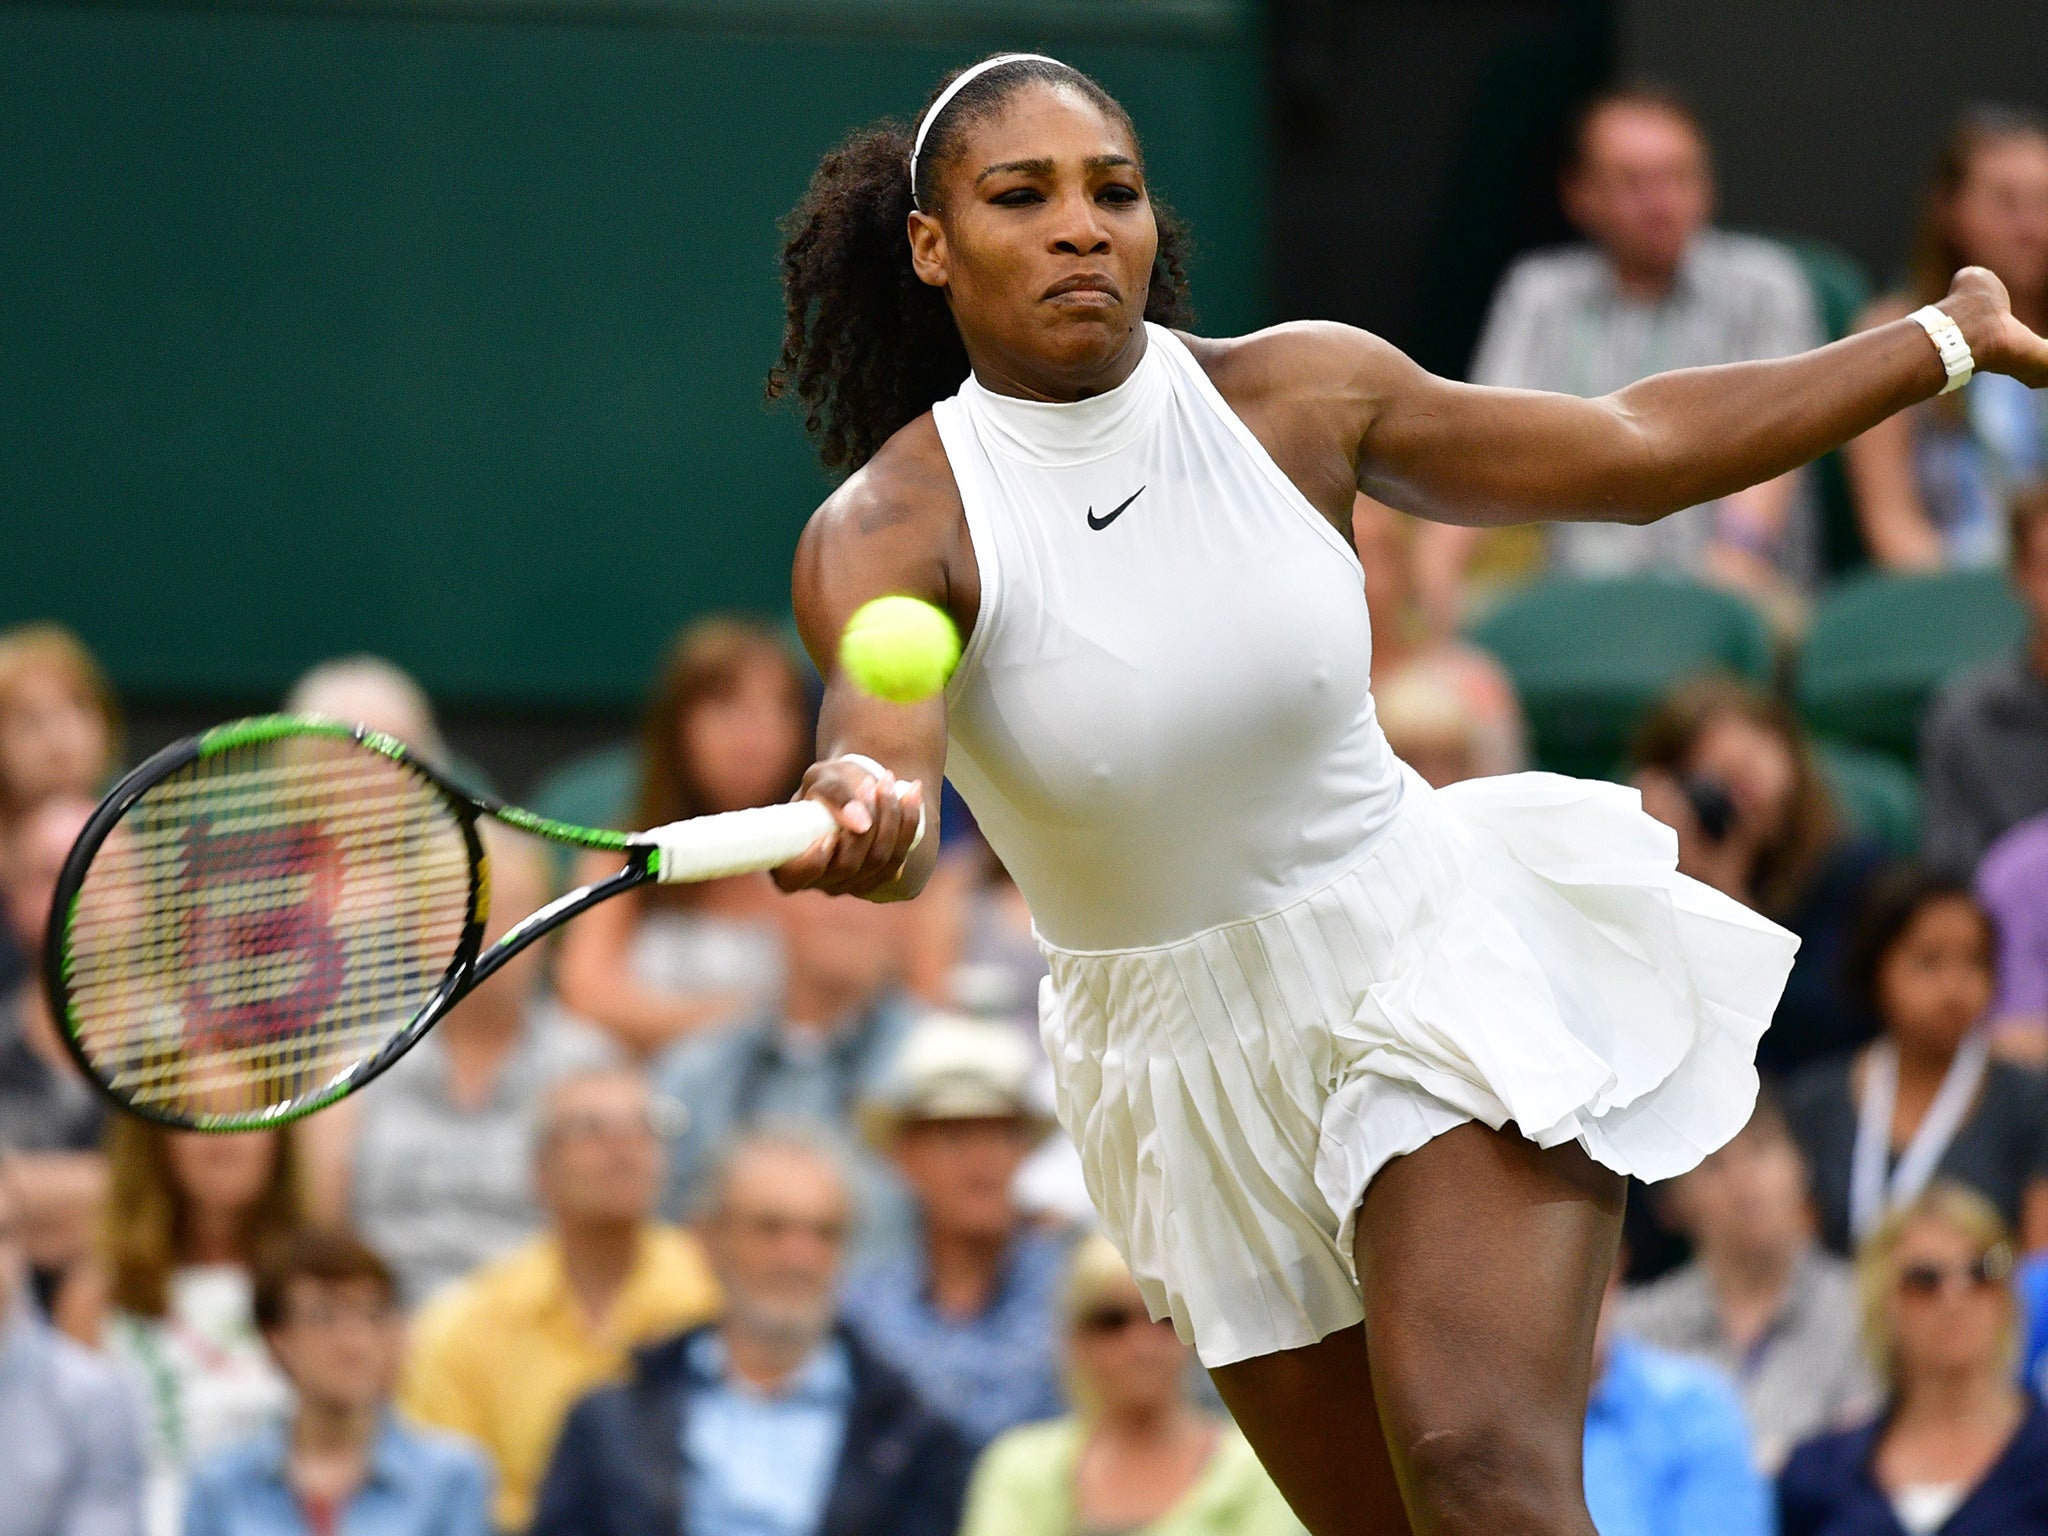 Wimbledon organizers 'happy' with court conditions as Serena